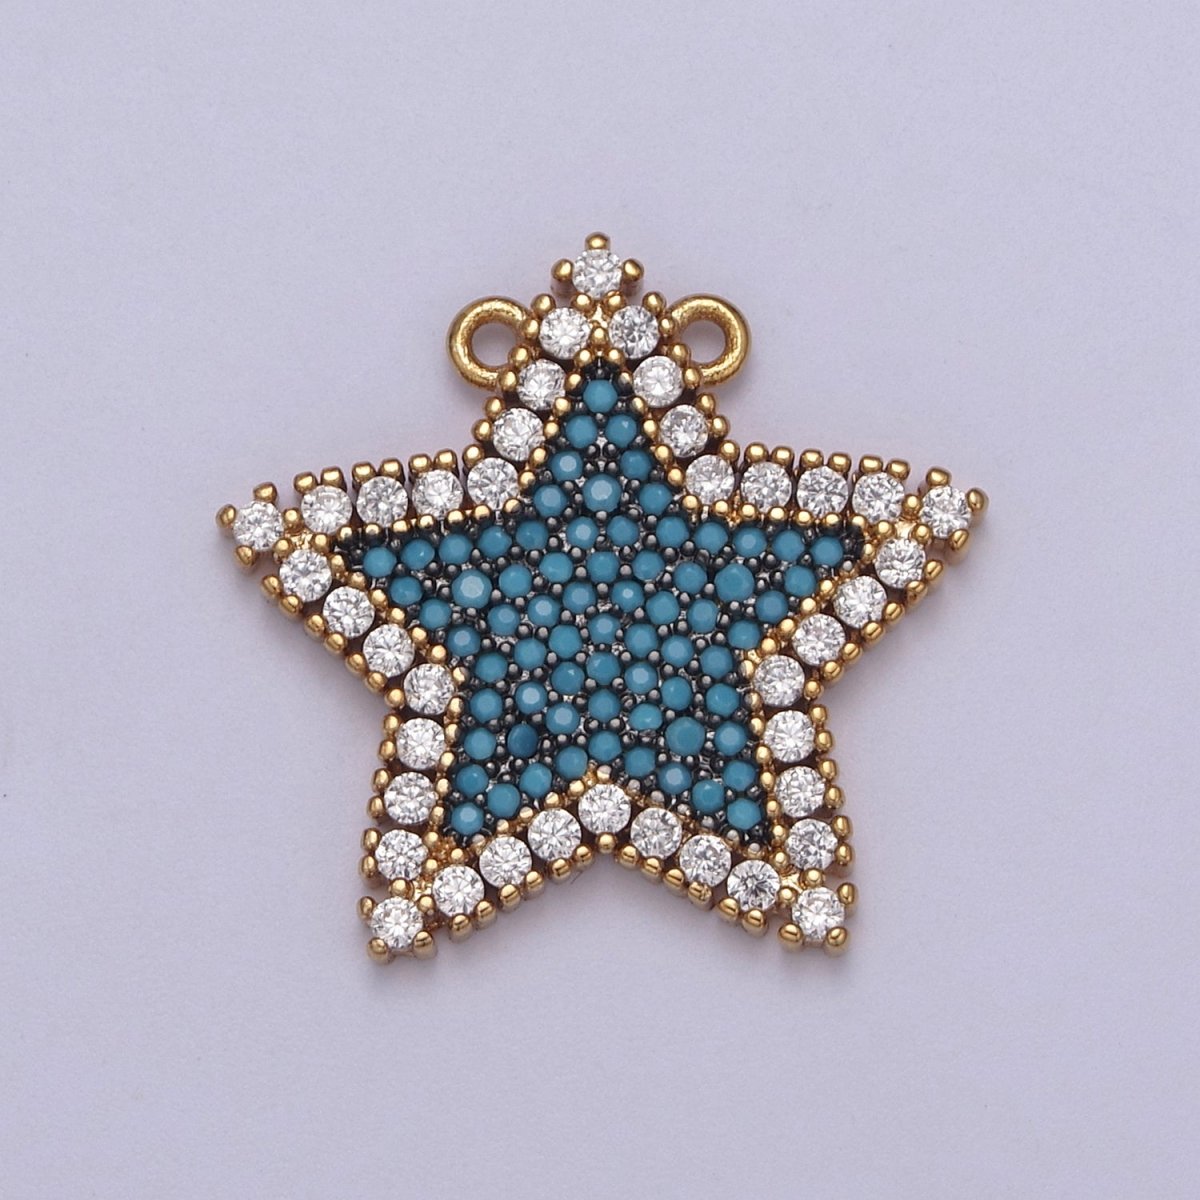 Micro Pave Star Pendant • 24k Gold Filled Star Charm Dainty Celestial Jewelry Making Supplies • Cubic Twinkle Little Star Green Blue Teal Pink CZ Star F-760 F-763 F-768 F-769 - DLUXCA